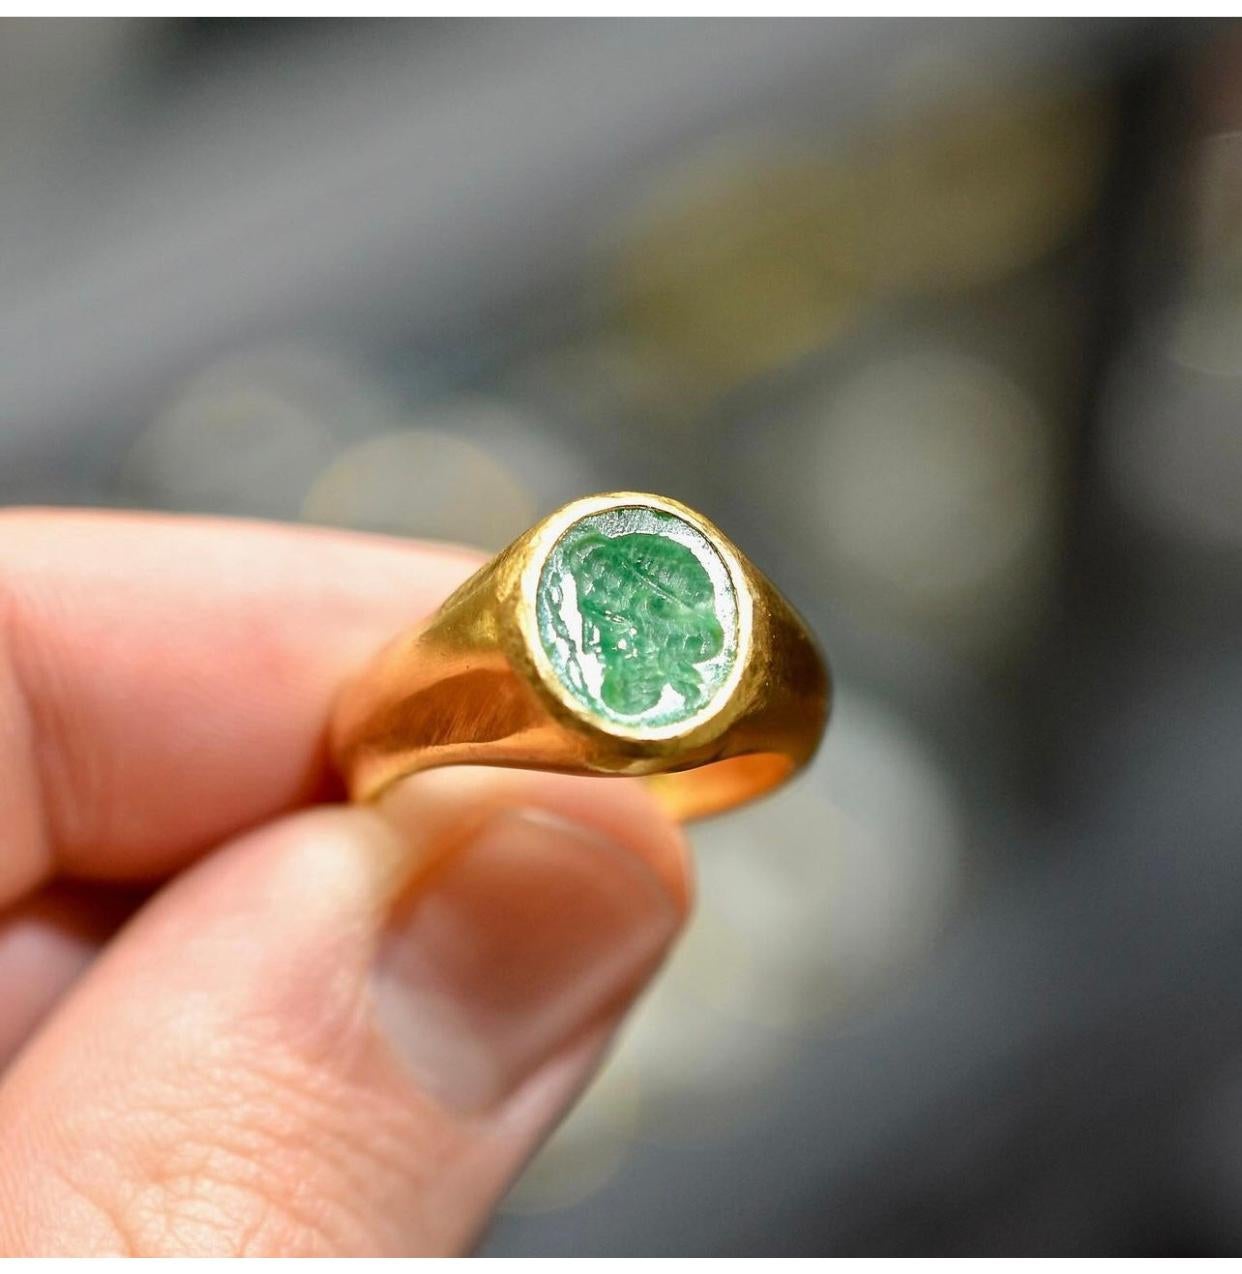 Uncut 18kt Yellow Gold And Emerald Magical Intaglio Ring